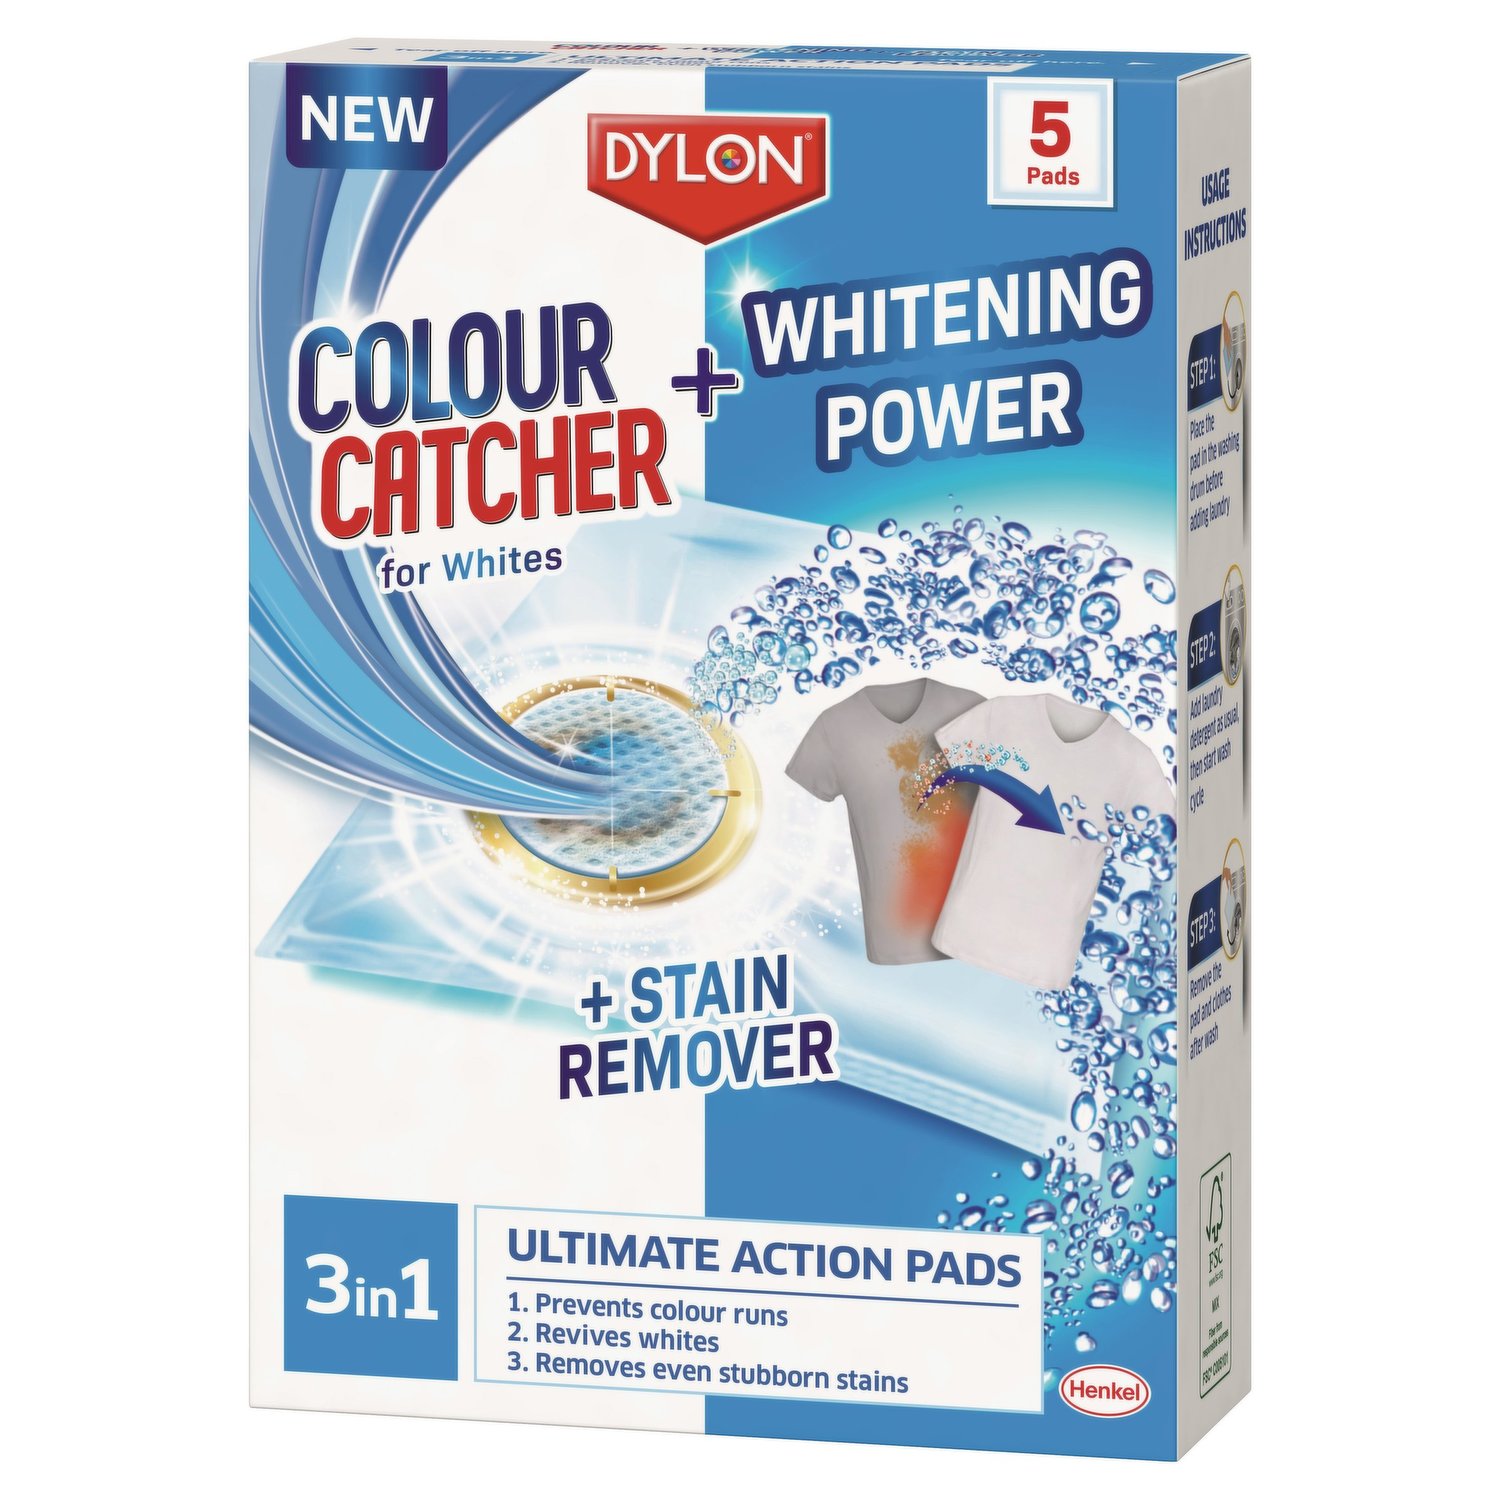 Dr. Beckmann Colour Run Remover Extra Strong, 150 g Online at Best Price, Stain Removers